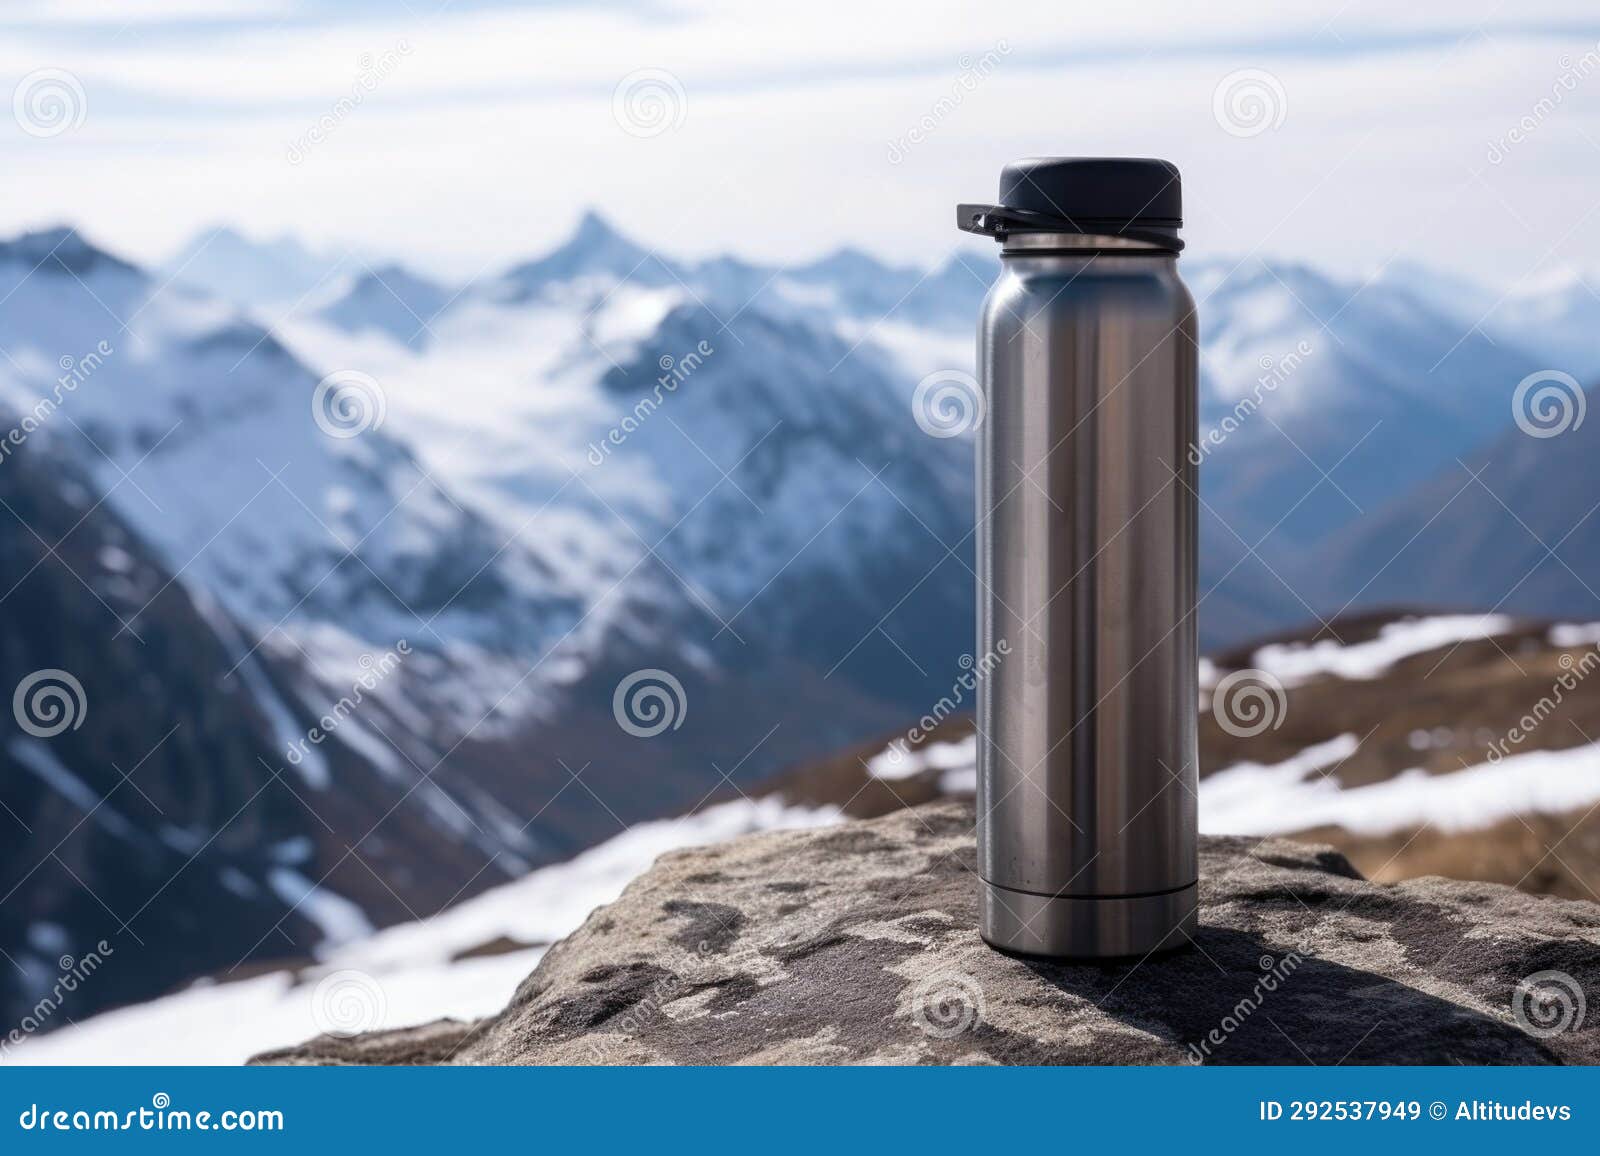 https://thumbs.dreamstime.com/z/thermos-flask-hot-chocolate-mountain-background-thermos-flask-hot-chocolate-mountain-background-created-292537949.jpg